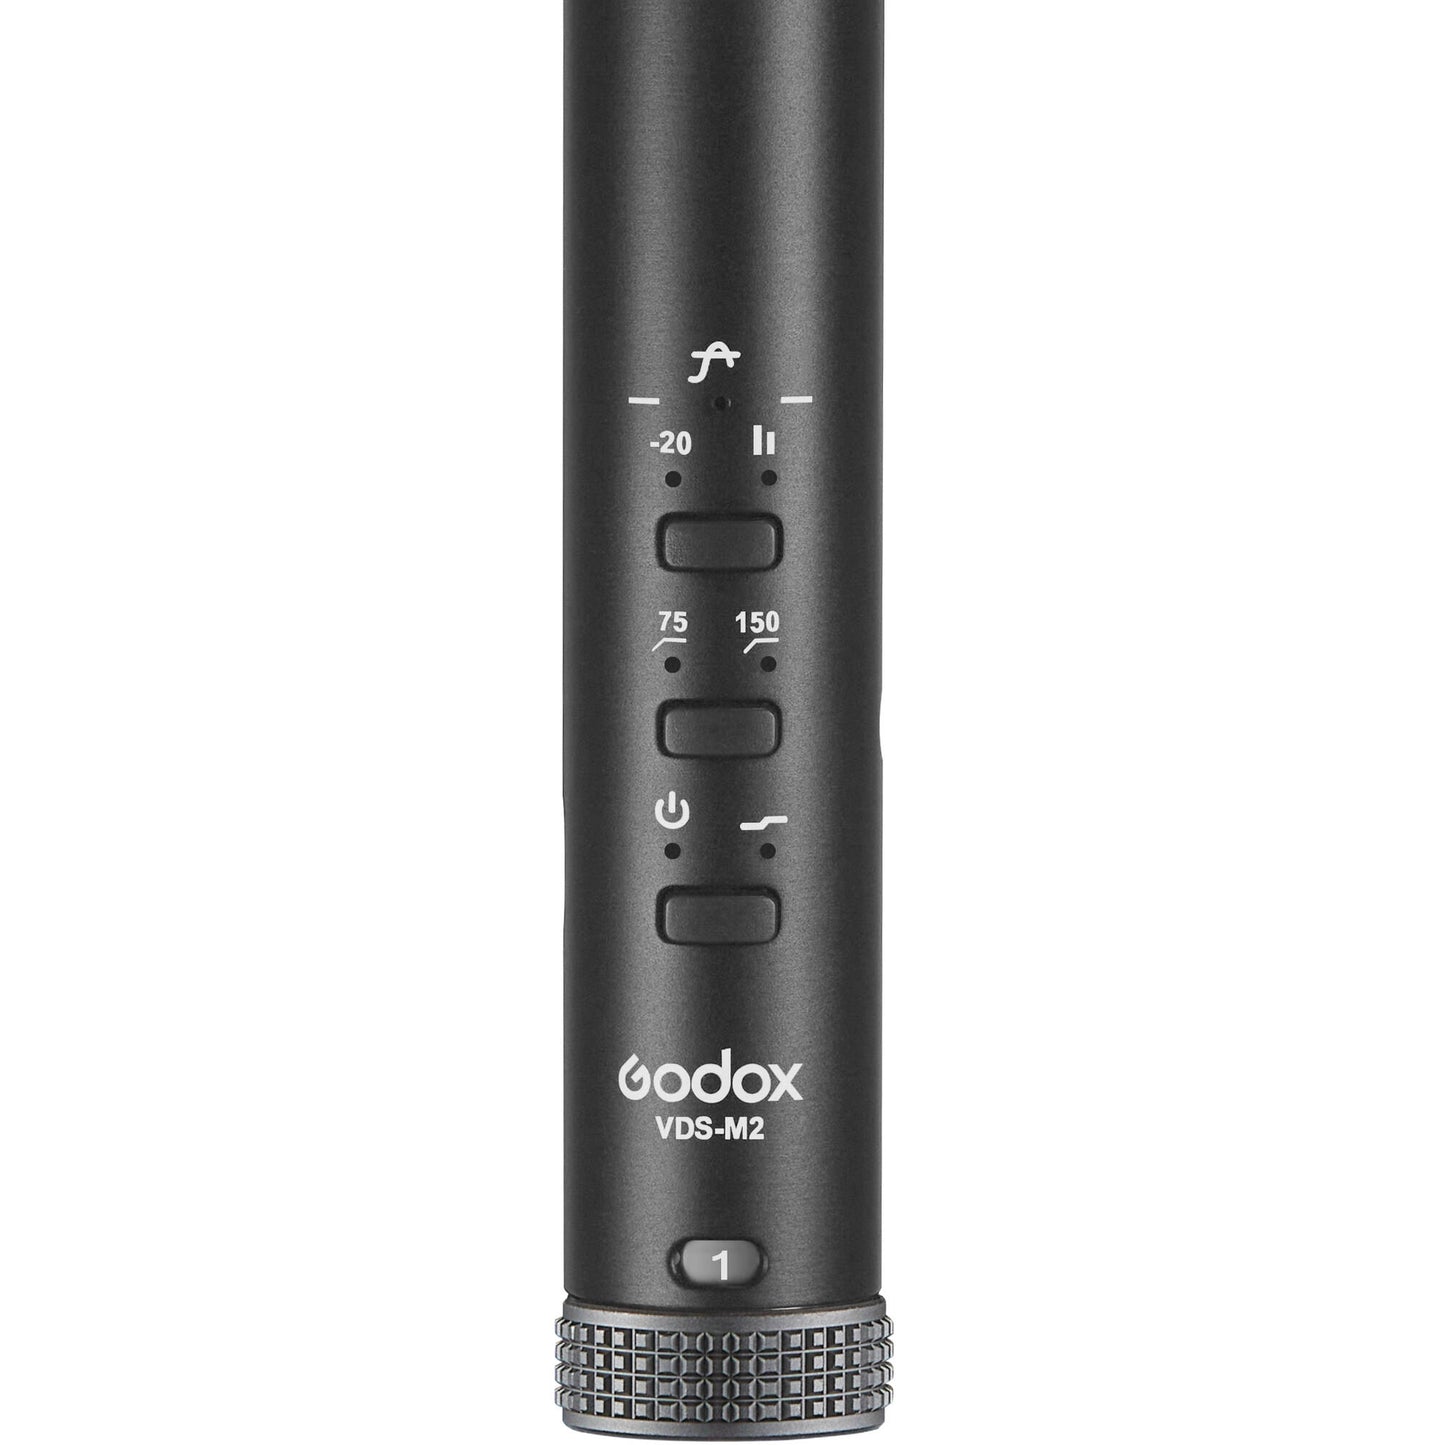 Godox VDS-M2 Supercardioid Condenser USB Shotgun Microphone with 3.5mm TRRS TRS Second Output, HPF and High Frequency Boost, Gain Control and Windscreen for Cameras, Mobile Devices & Recorders